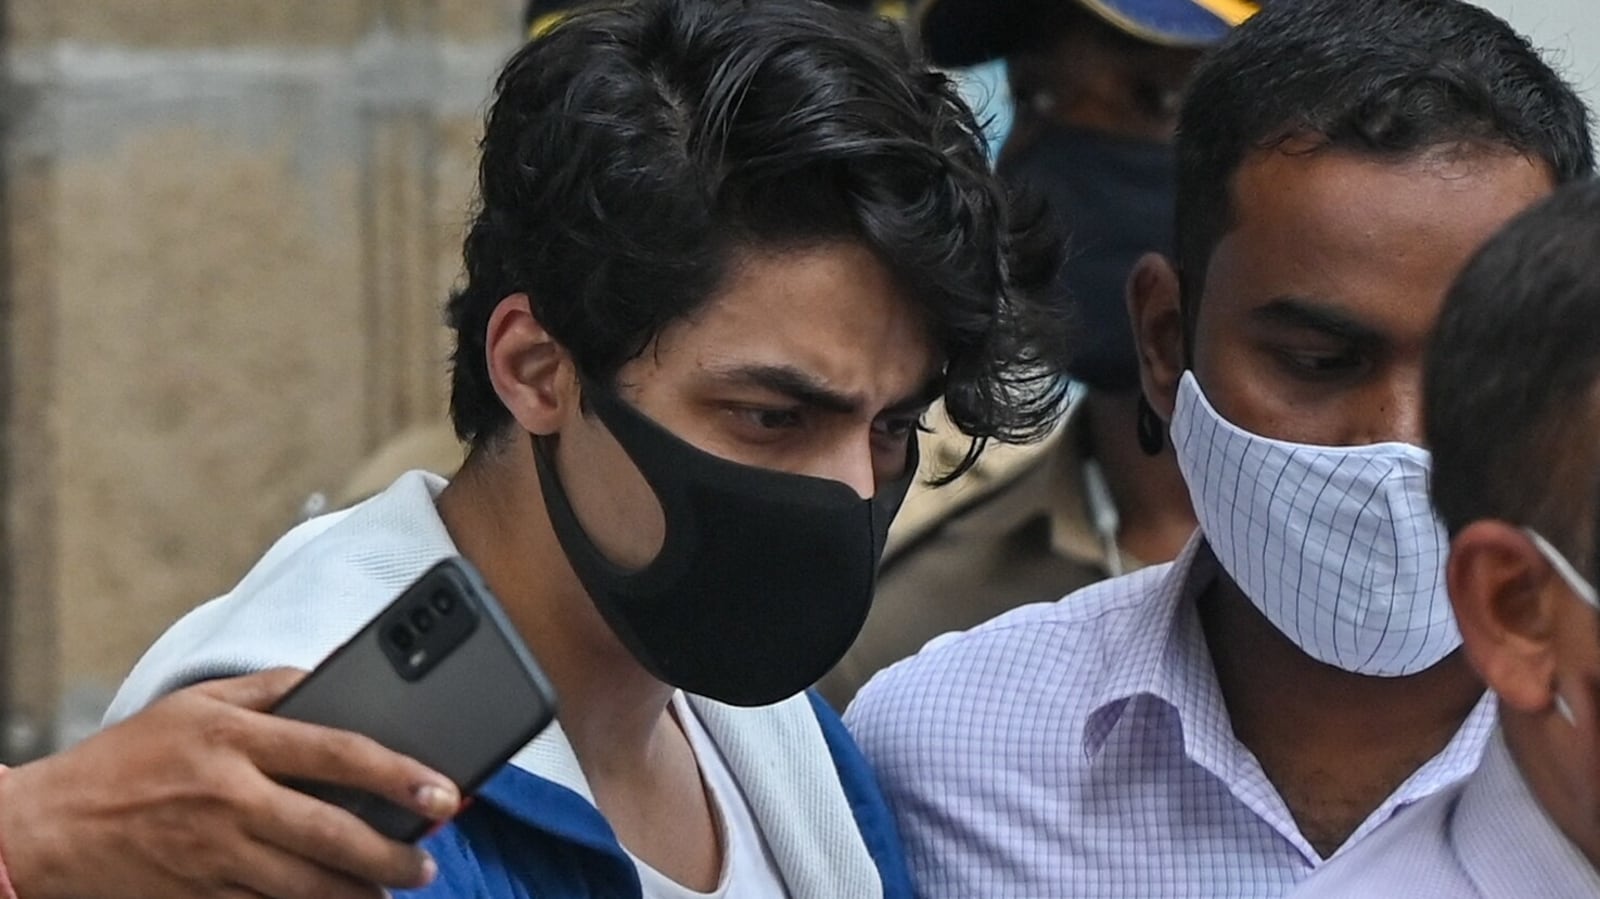 Aryan Khan has been denied bail after he was arrested By NCB